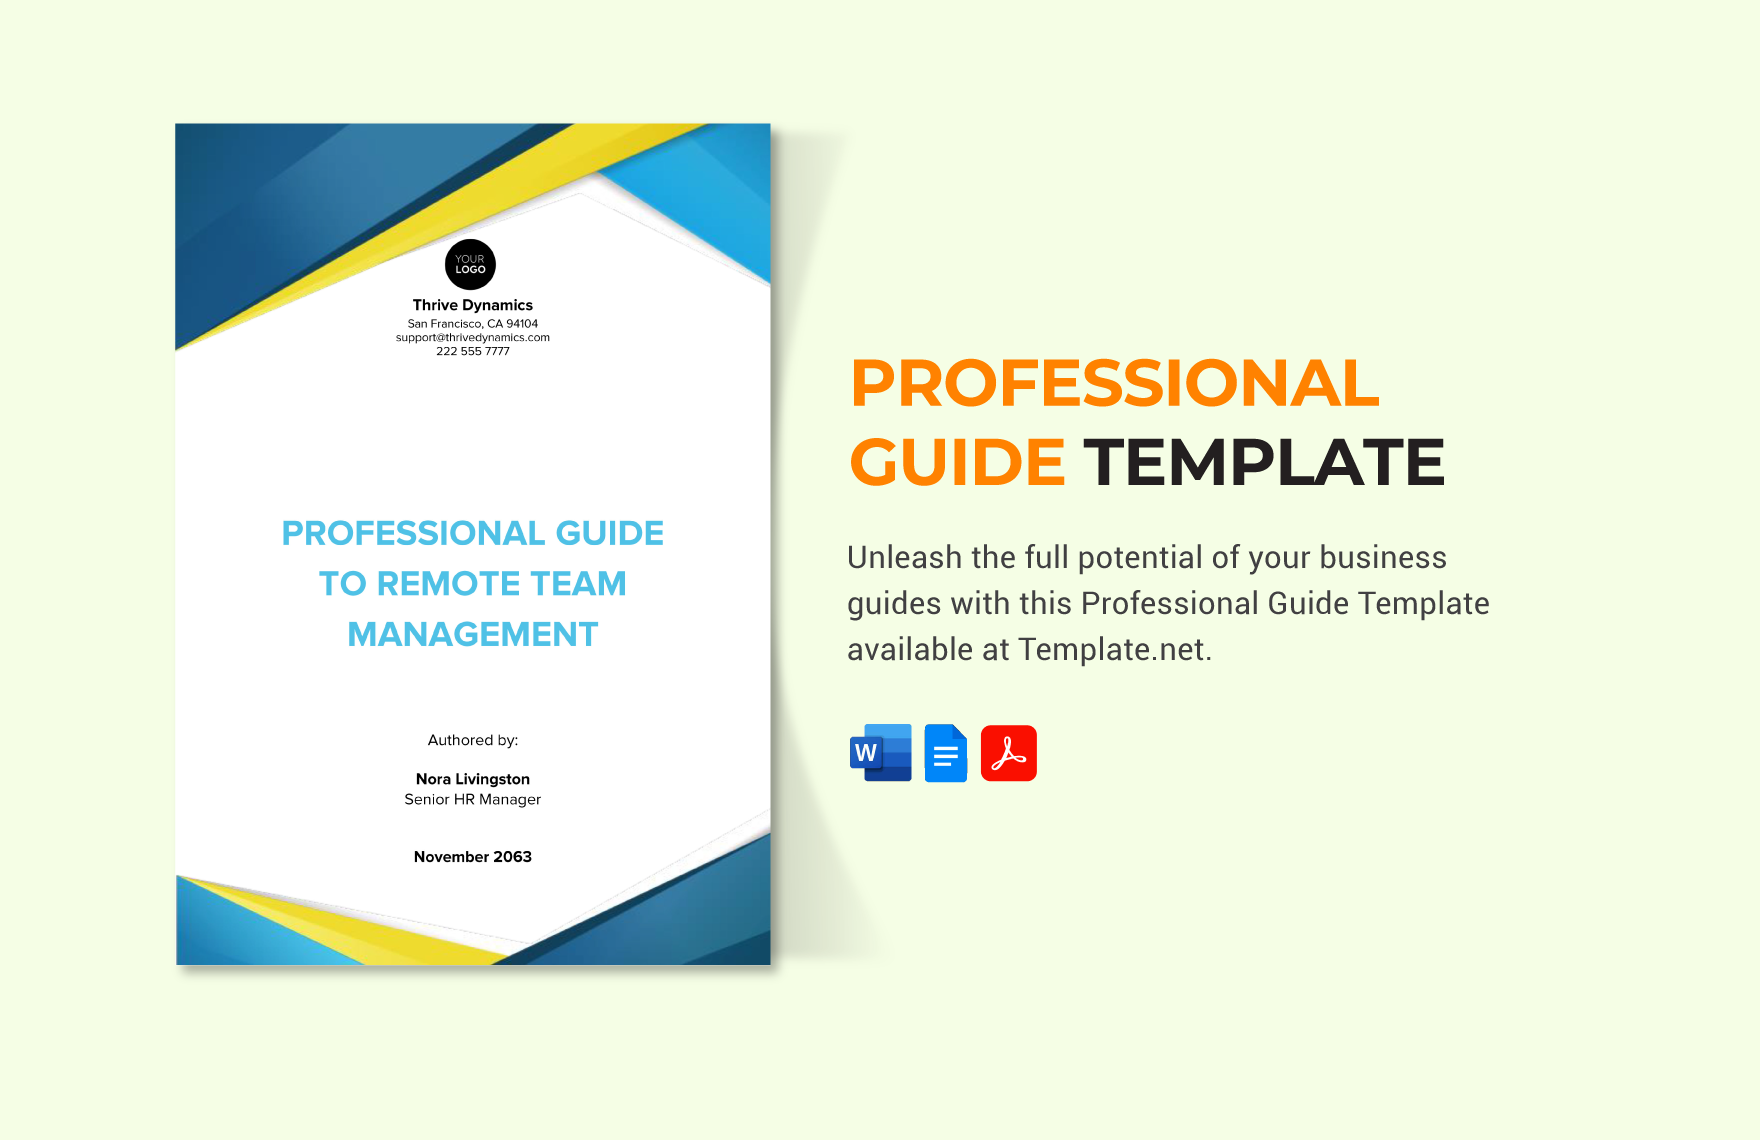 Professional Guide Template